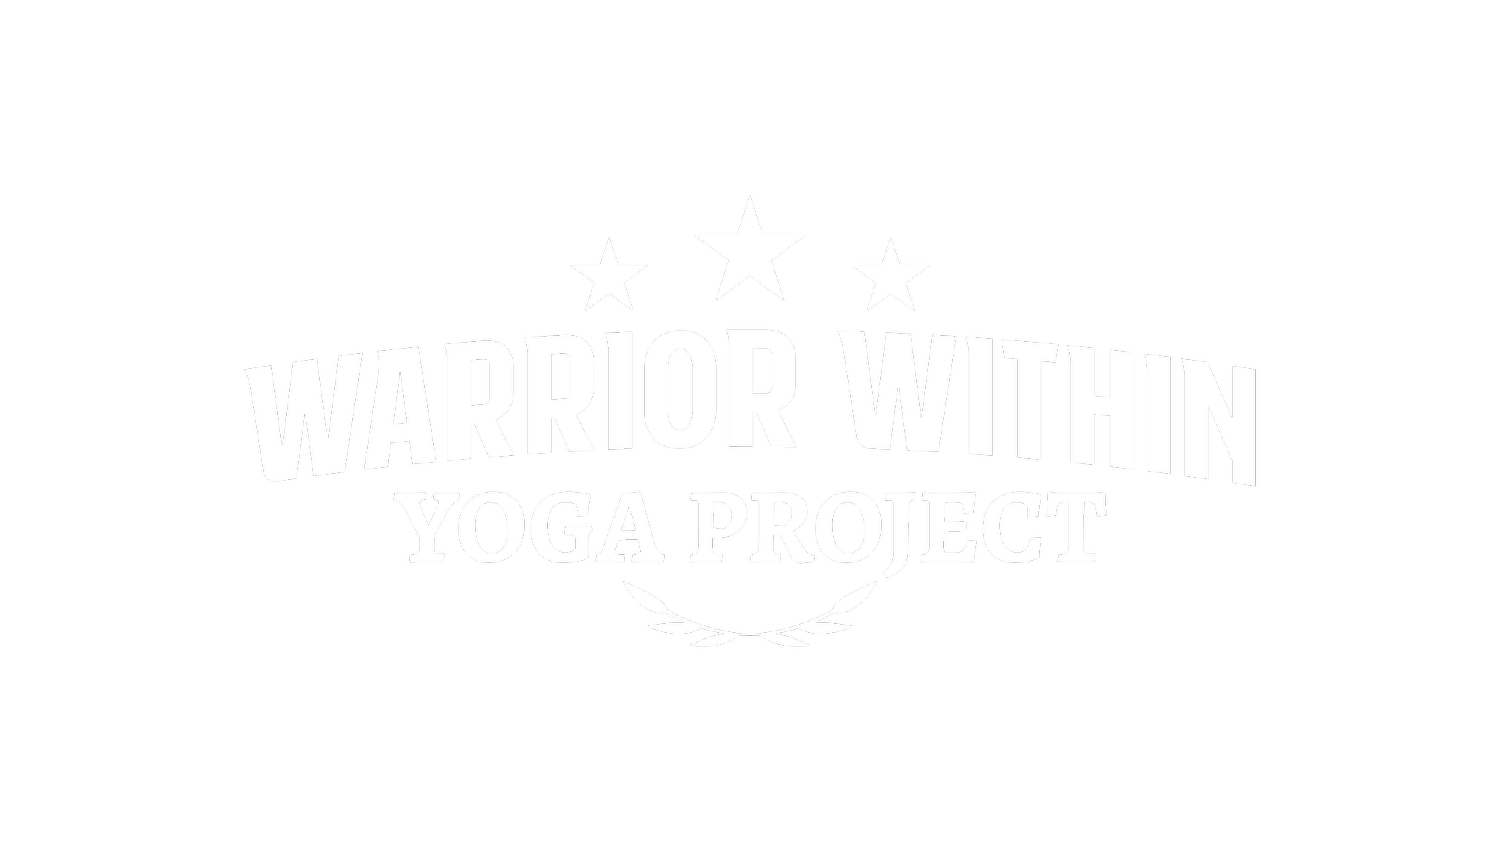 Warrior Within Yoga Project